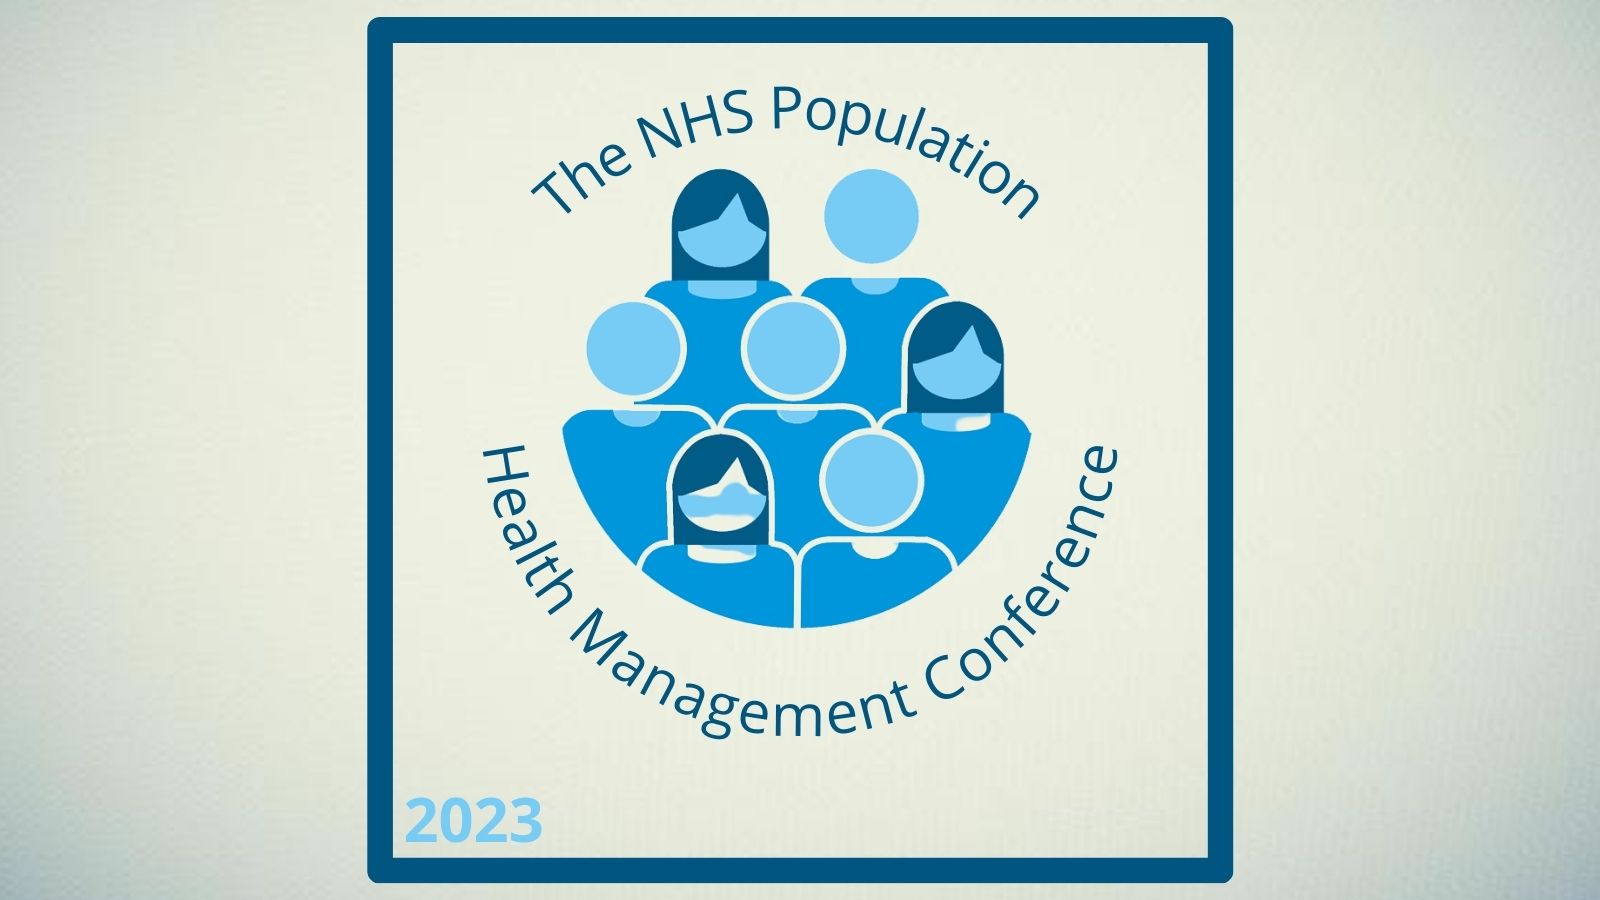 Convenzis Event NHS Population Health Management Conference 2023